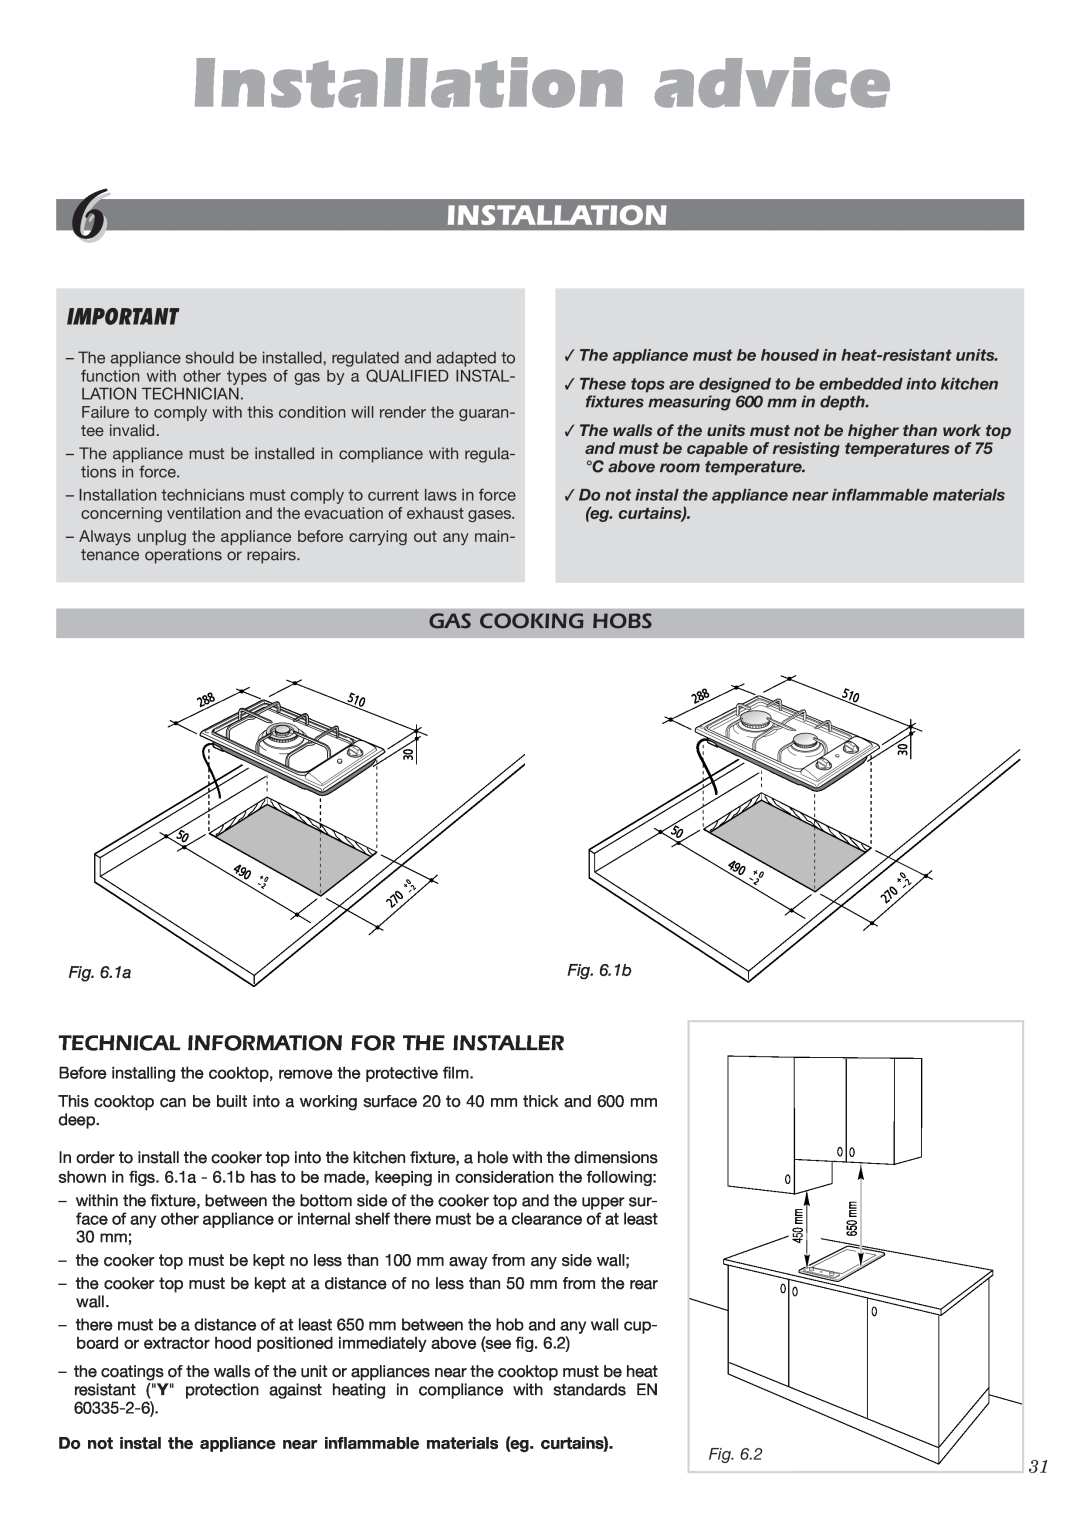 CDA HCC360 manual 6INSTALLATION, Installation advice, Gas Cooking Hobs, Technical Information For The Installer, 1b 